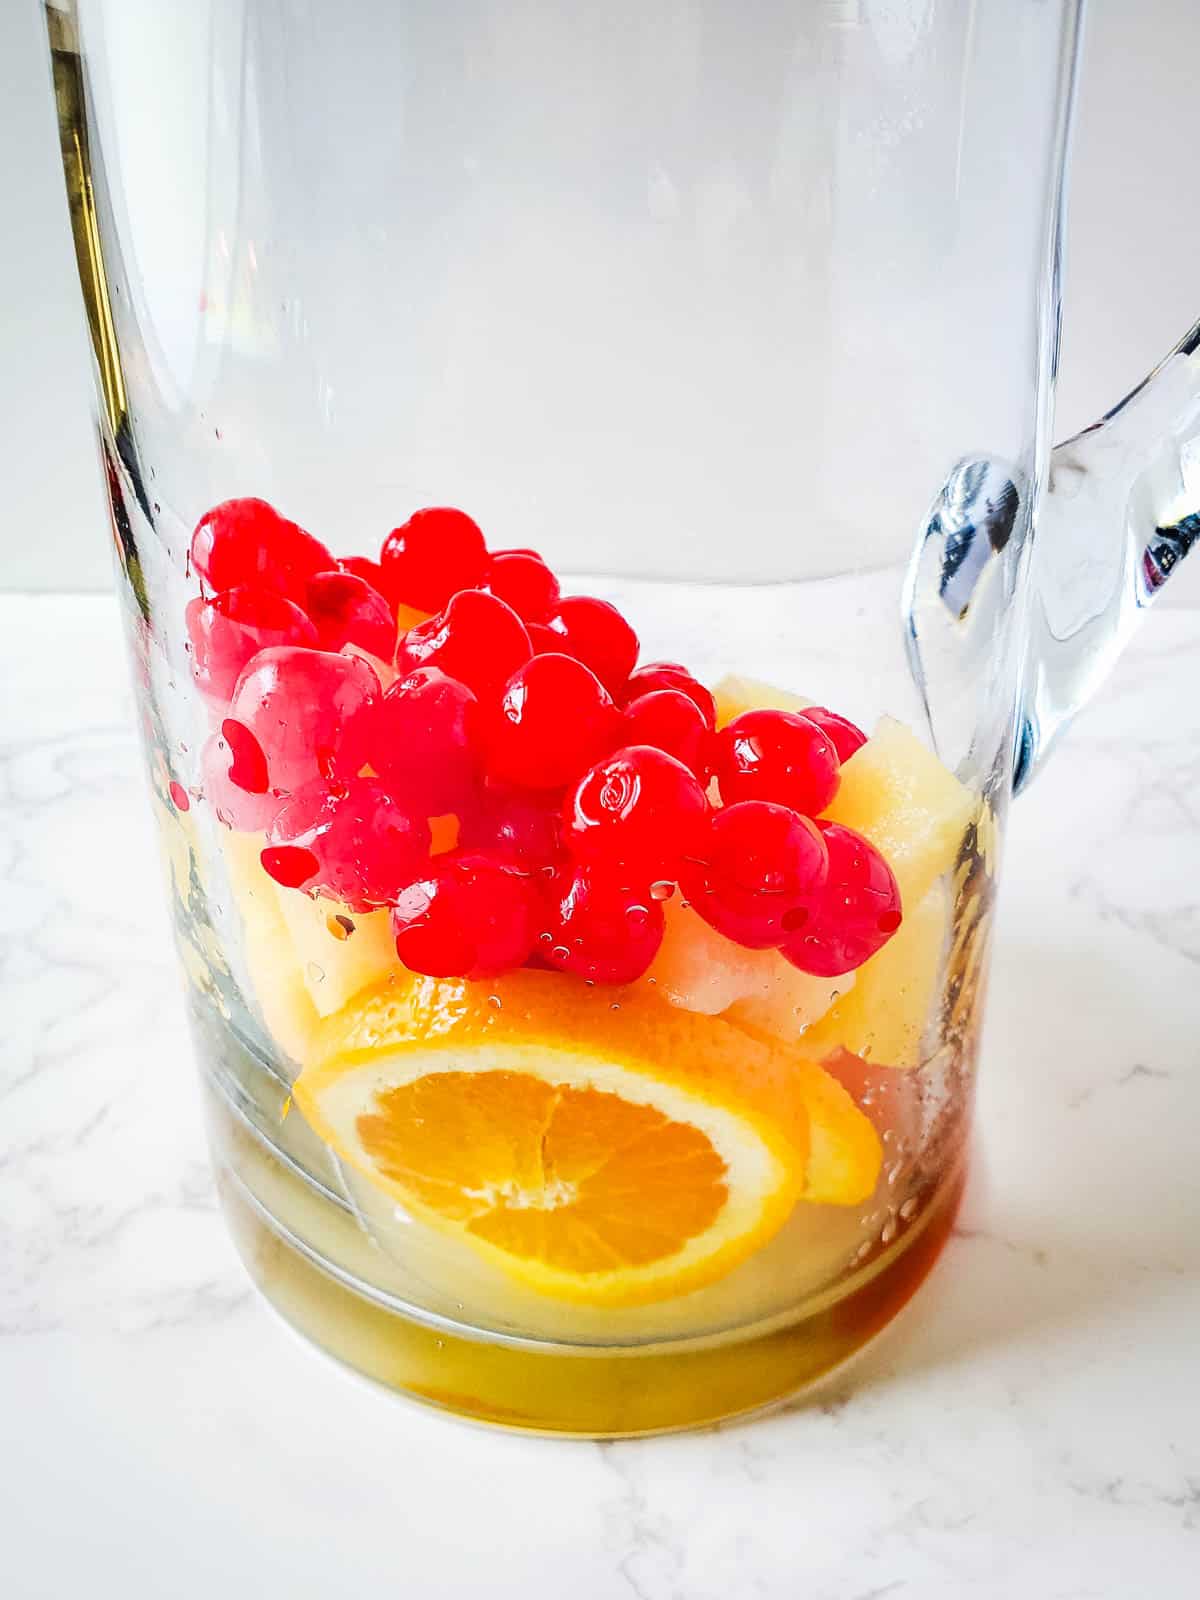 A pitcher with sliced oranges, chunks of pineapple and marashino cherries.